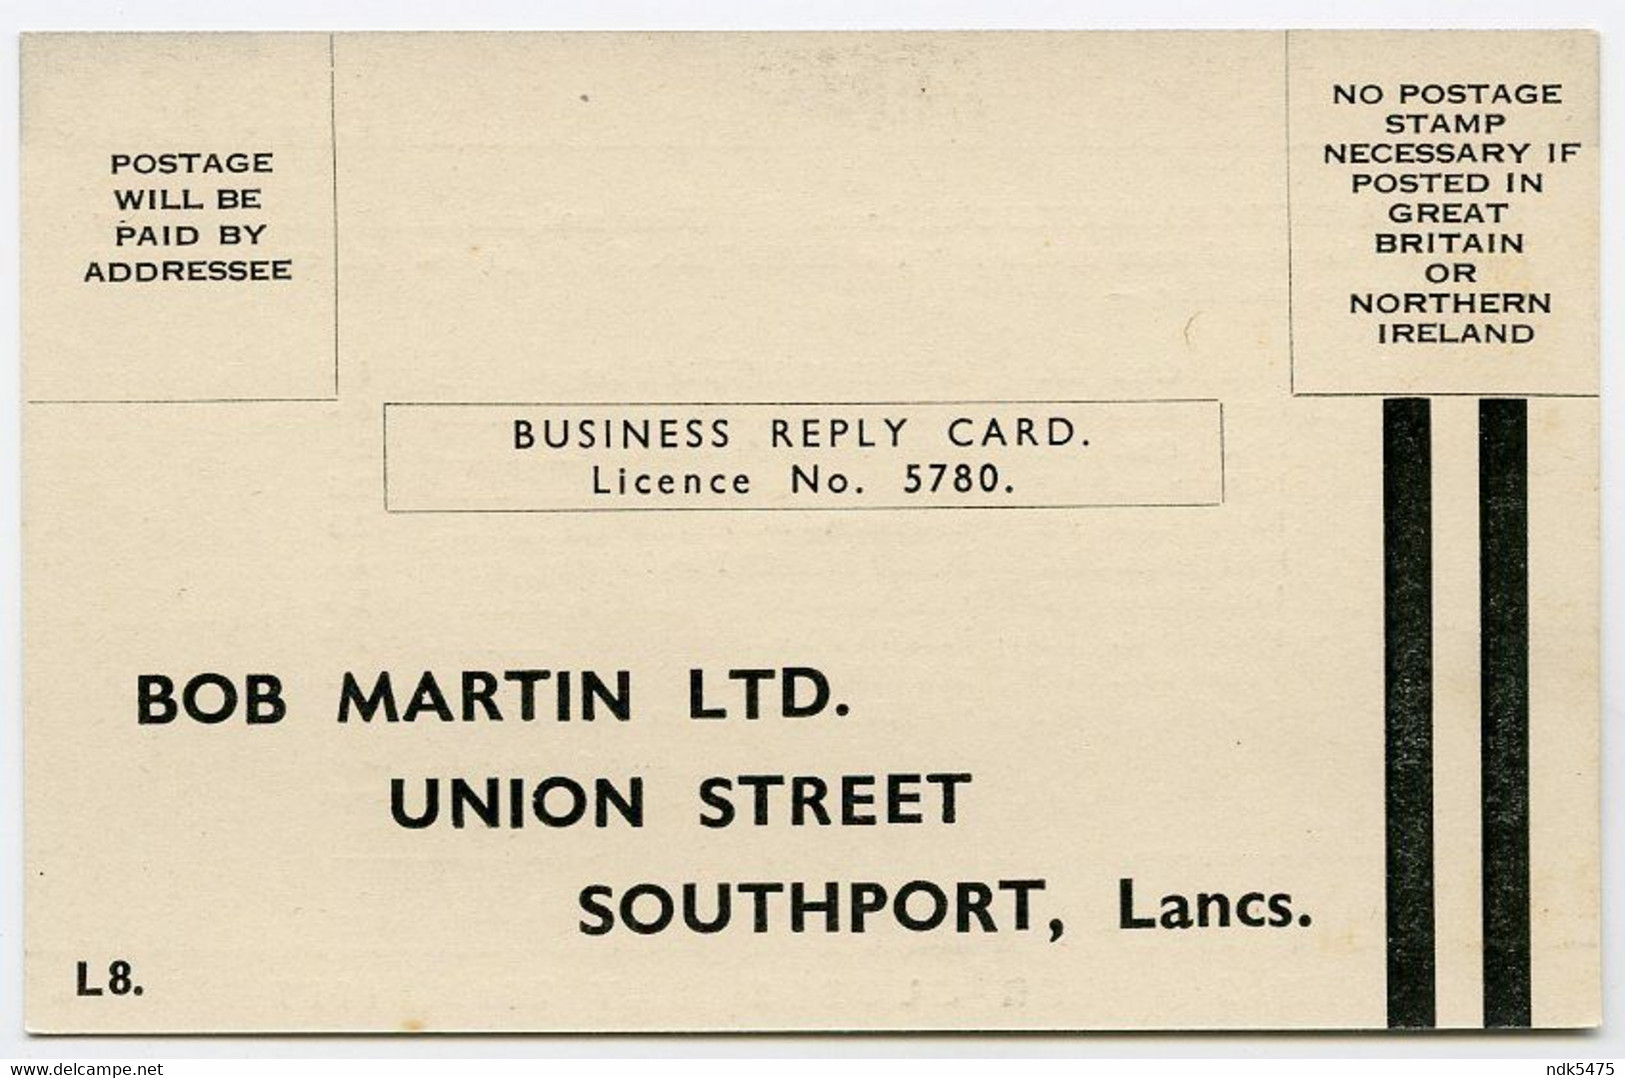 SOUTHPORT : BOB MARTIN, UNION STREET - SPECIAL OFFER, 1937 (ADVERTISING - BUSINESS REPLY CARD) - Southport